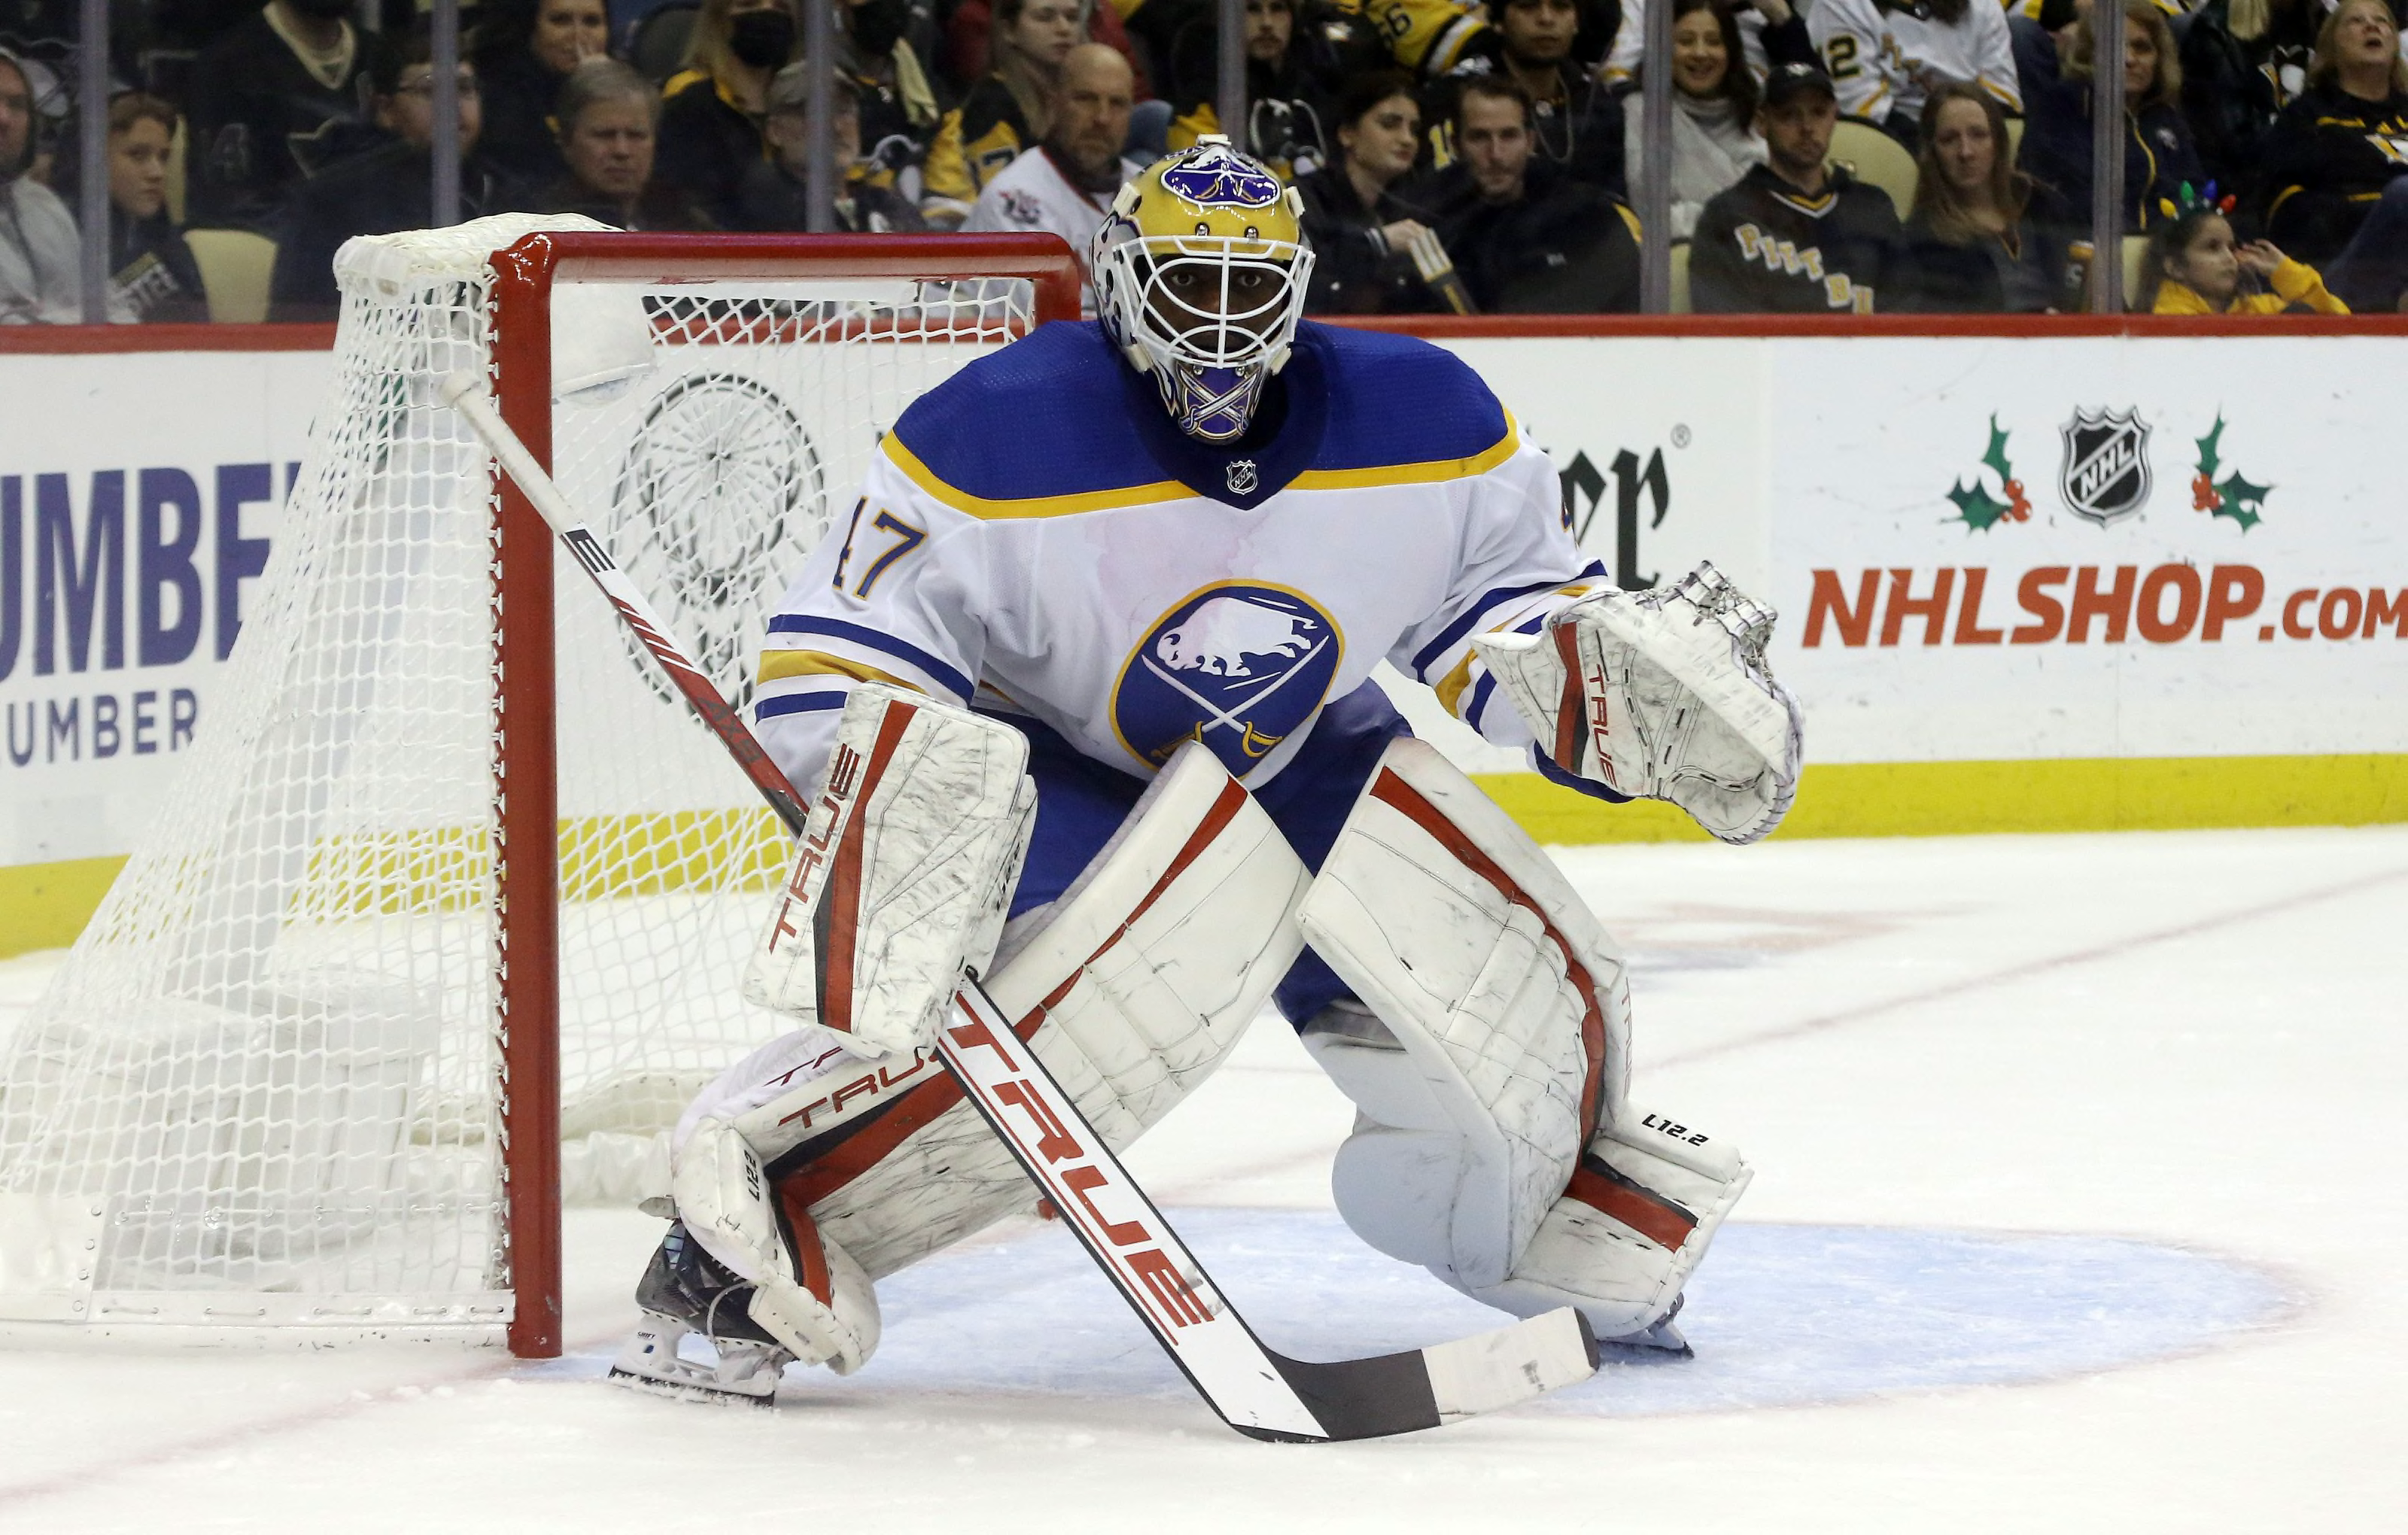 Sabres goalie prospects – Two in the Box